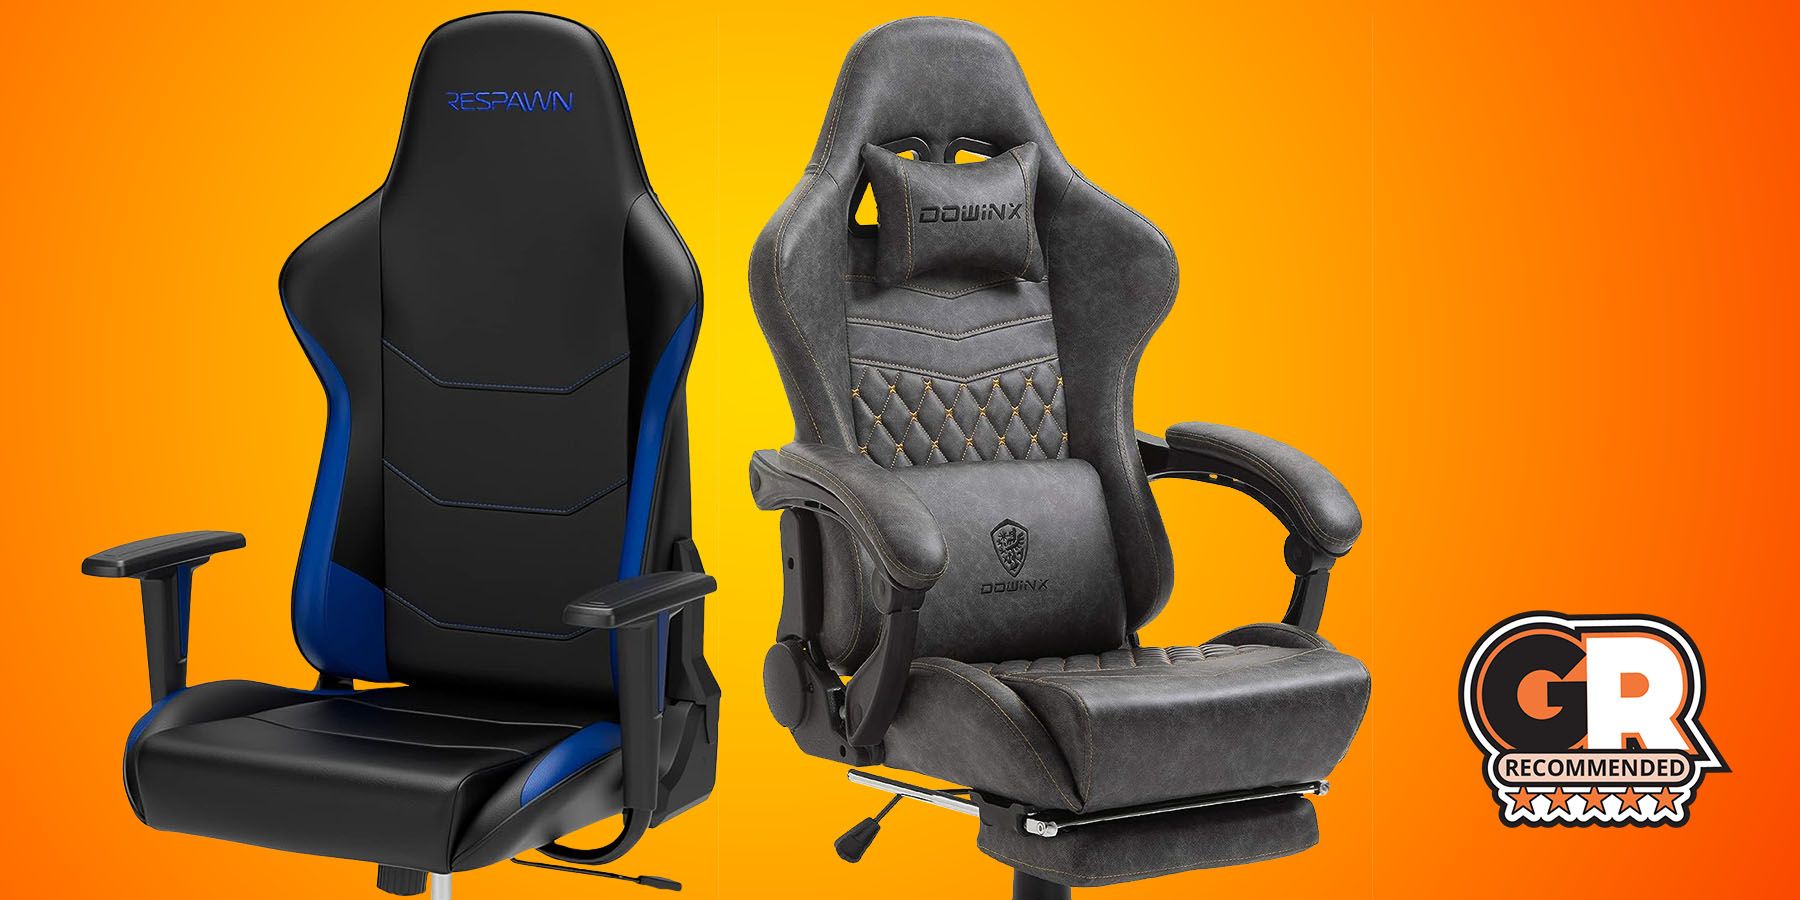 https://static0.gamerantimages.com/wordpress/wp-content/uploads/2023/11/best-gaming-chairs-under-200-dollars-2023-dowinx-respawn-110-game-rant-feature.jpg